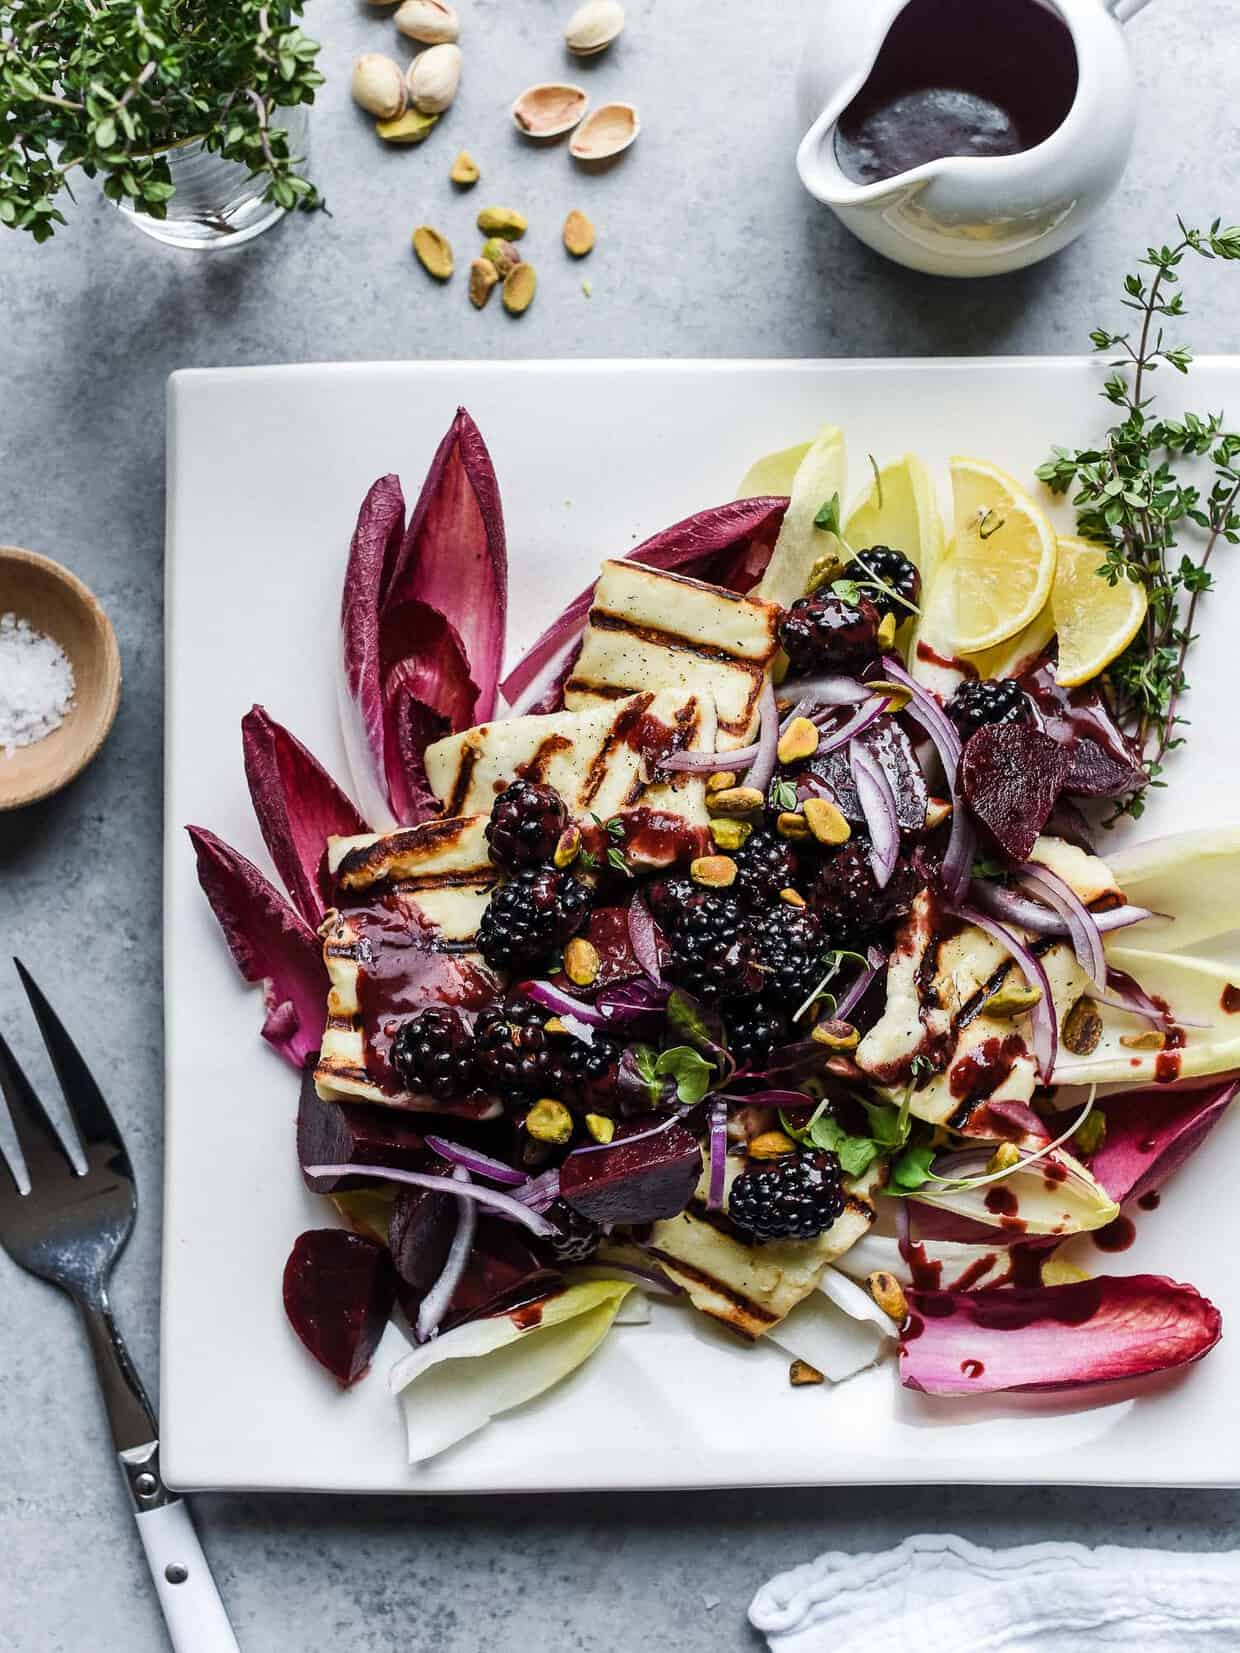 Halloumi Salad with Beets and Blackberries